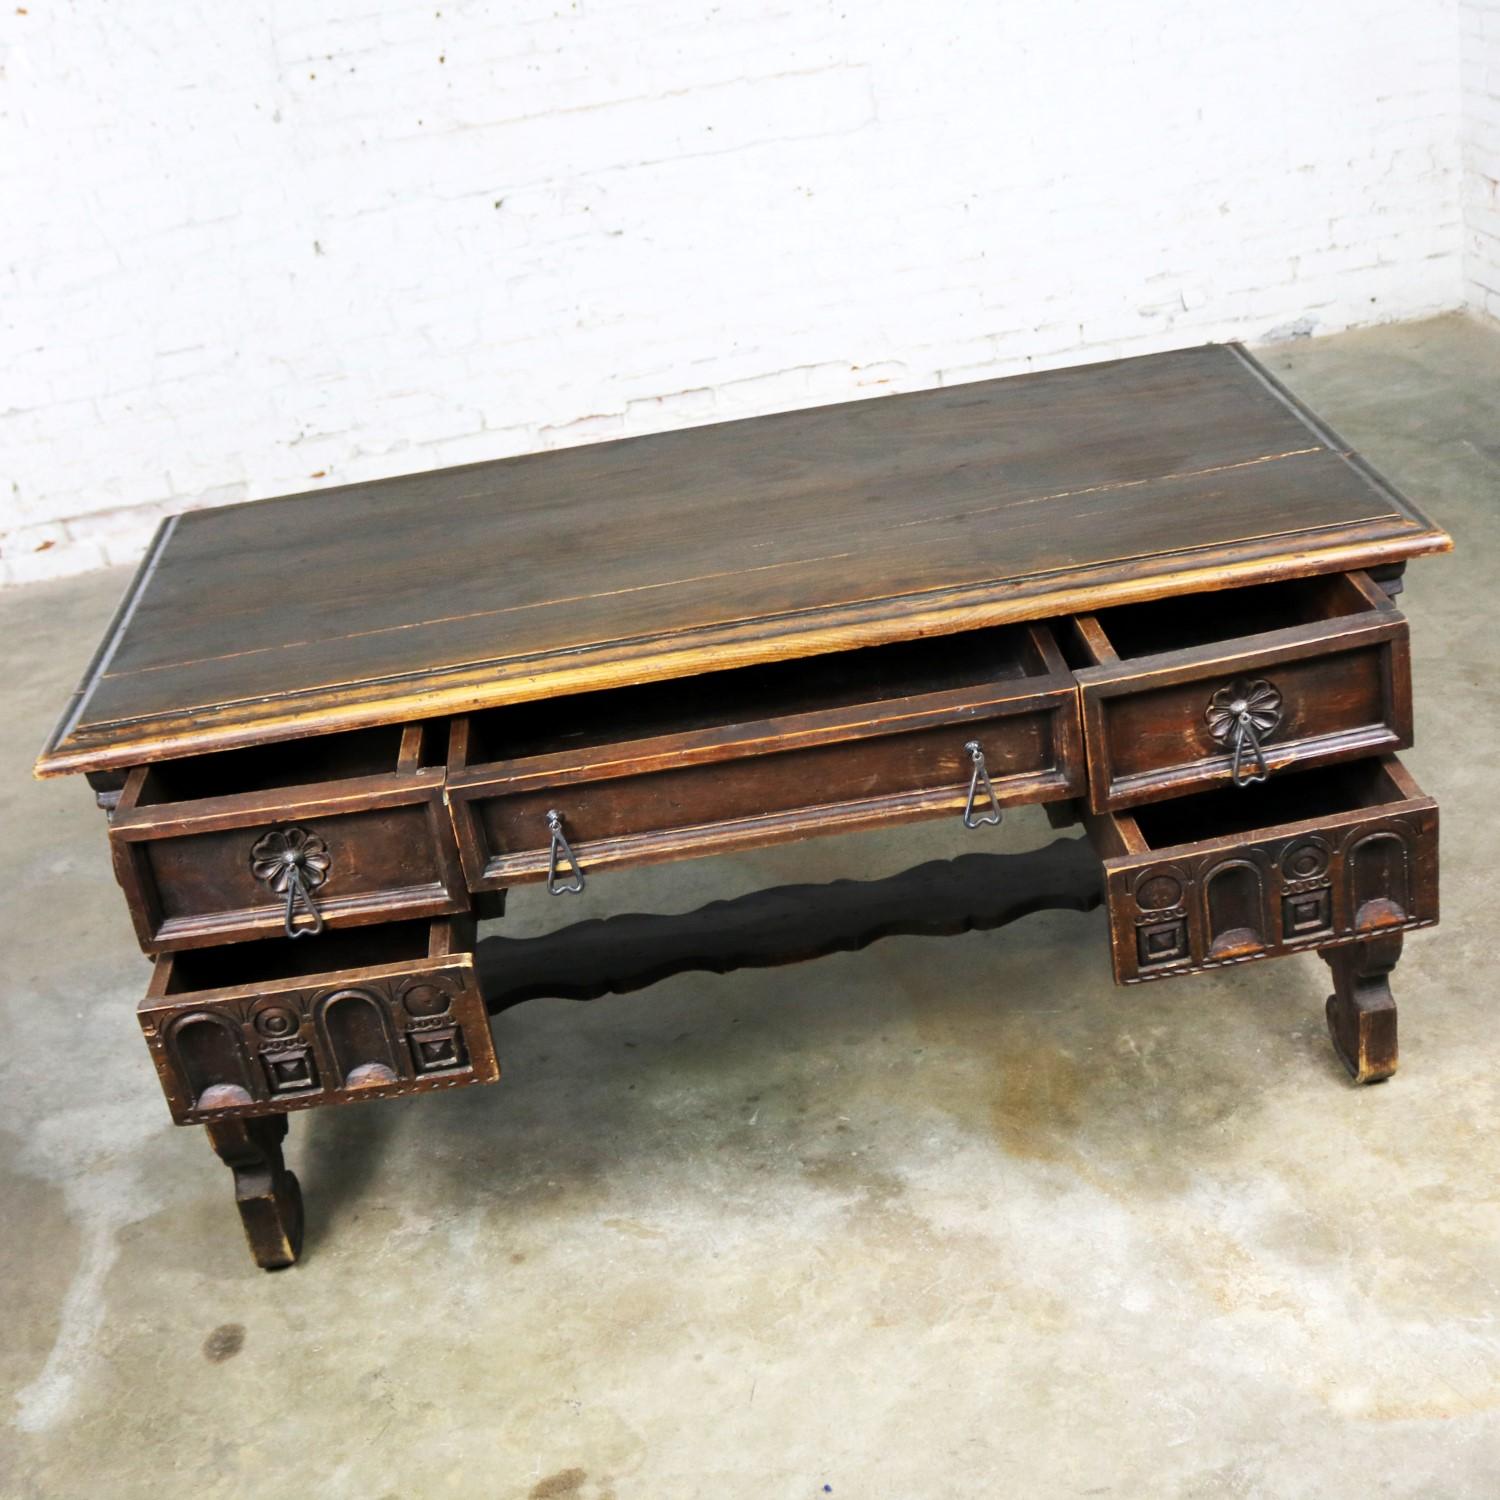 20th Century Spanish Revival Style Desk with Handwrought Hardware by Artes De Mexico